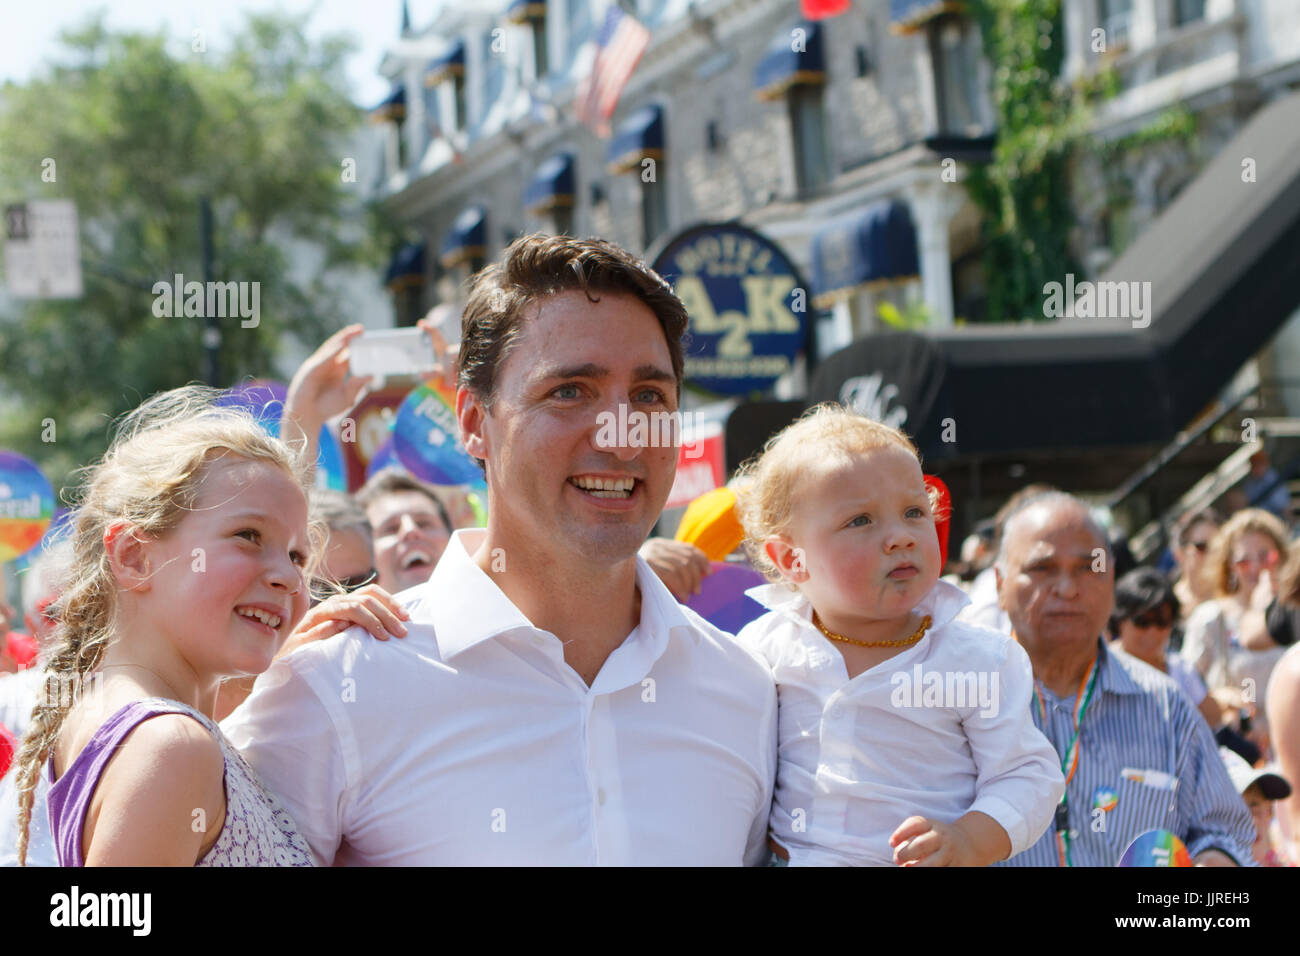 Justin Trudeau, leader of the Liberal party of Canada walks in the Pride parade in Montreal with his two children Stock Photo